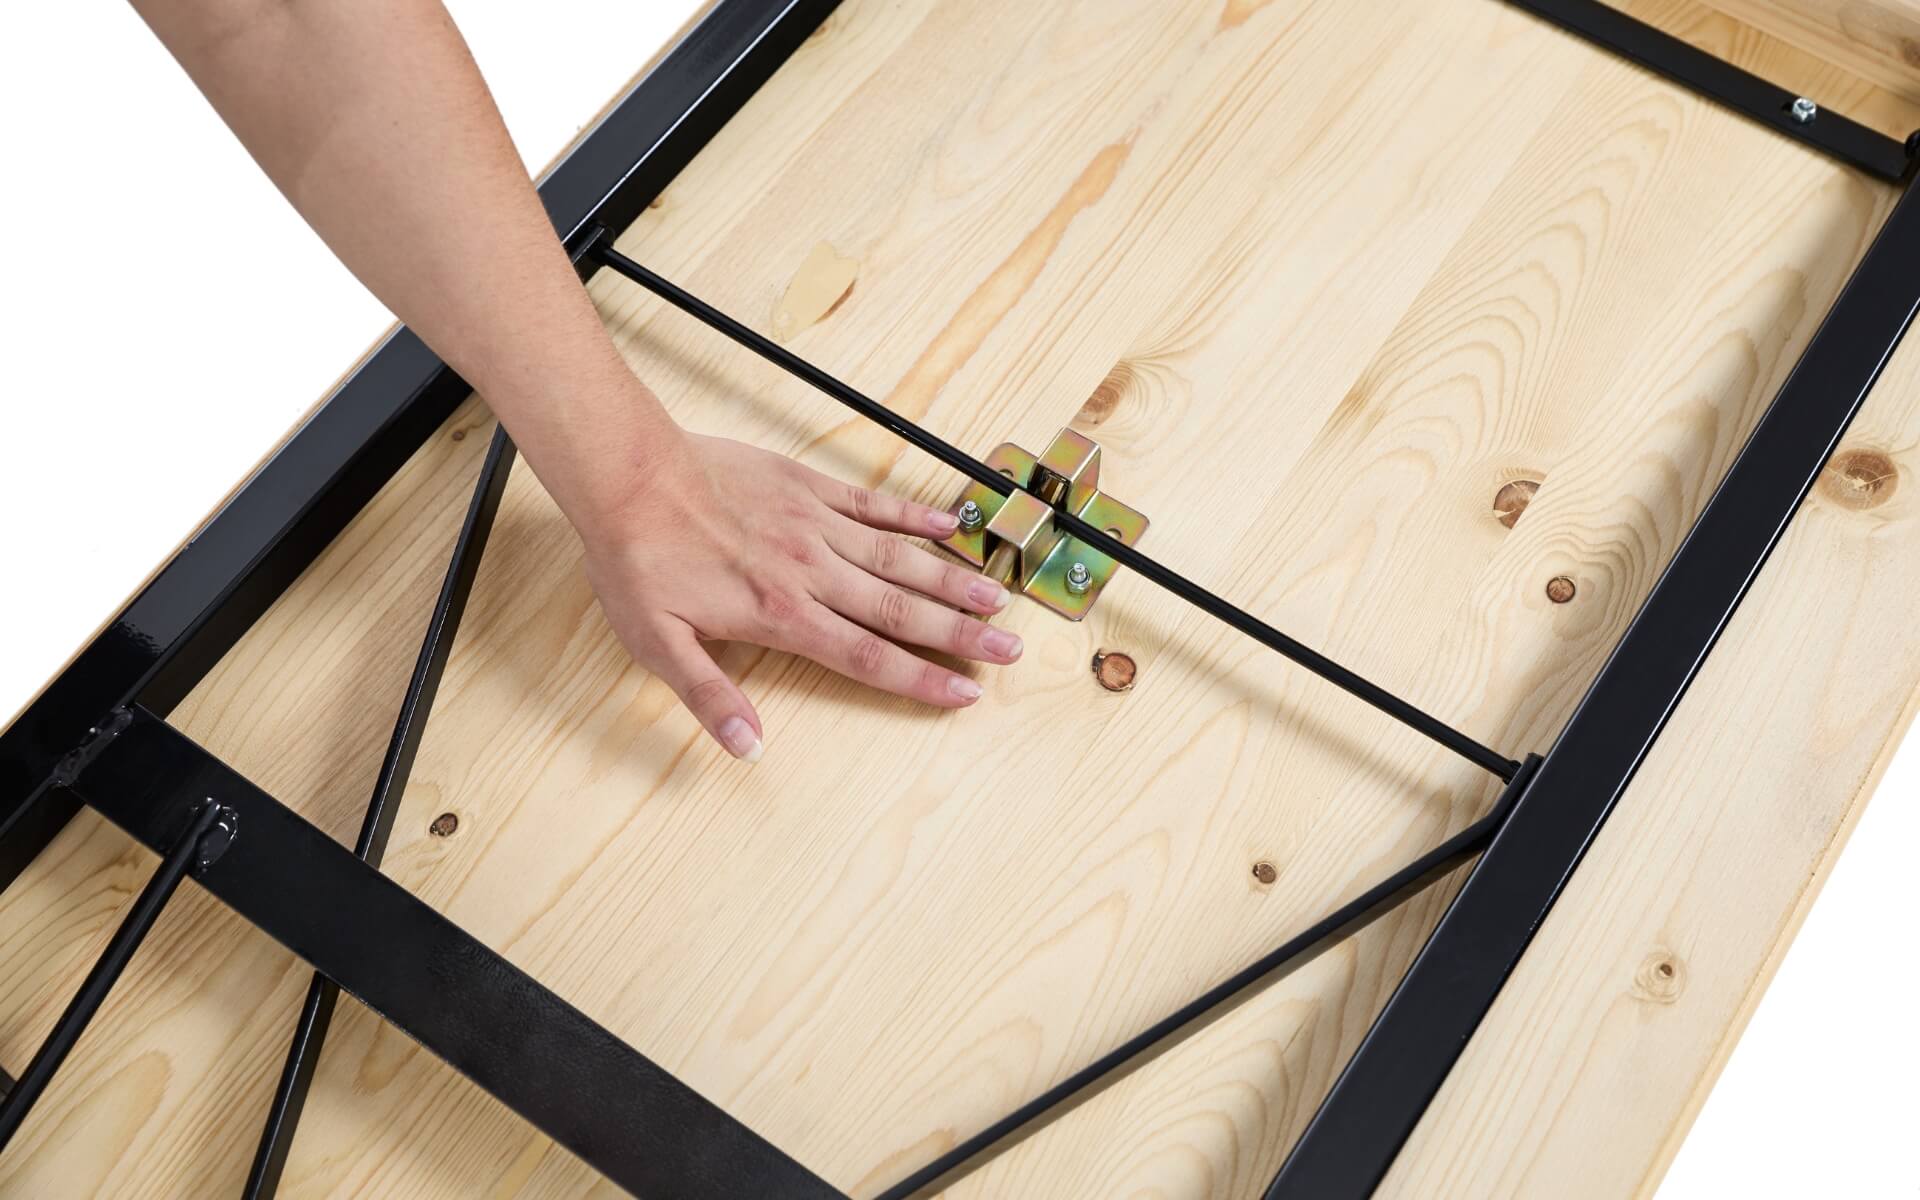 One hand pushes down the lever of the folding furniture lock to assemble the poseur table "200x60".